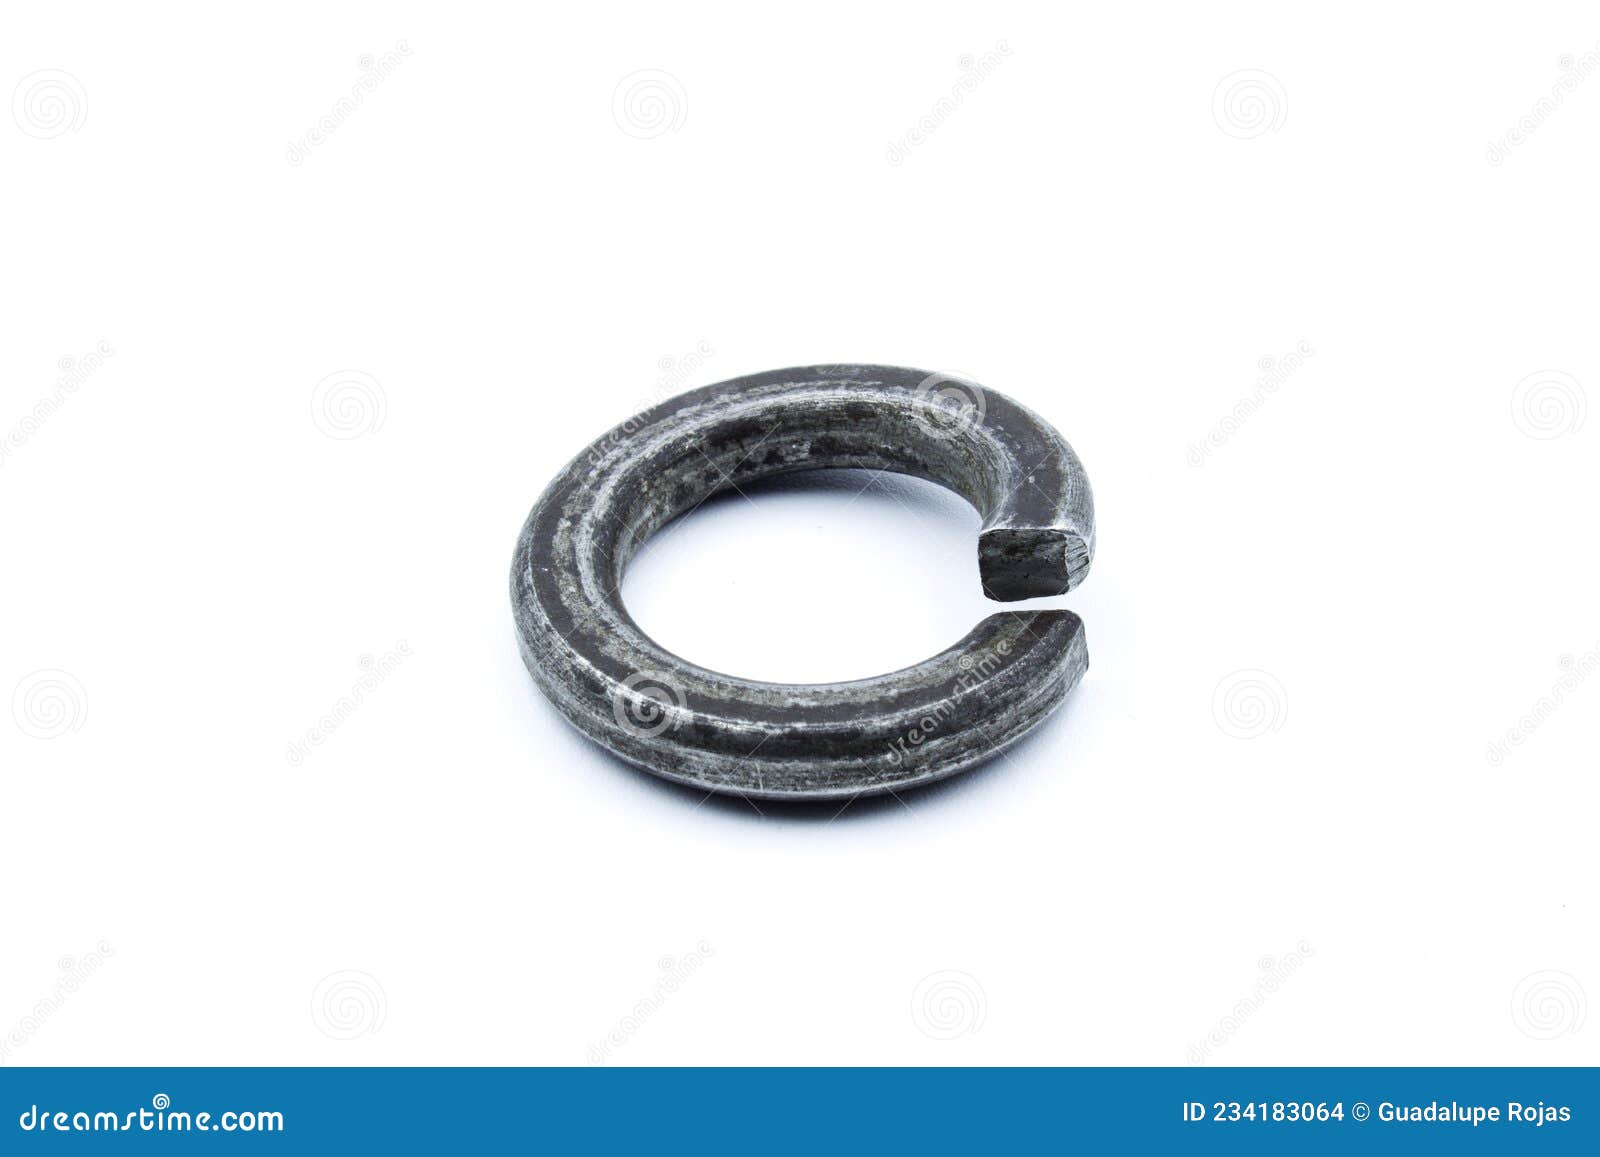 https://thumbs.dreamstime.com/z/thin-piece-generally-circular-hole-center-which-used-to-keep-nut-bolt-tight-ensure-hermetic-closure-234183064.jpg